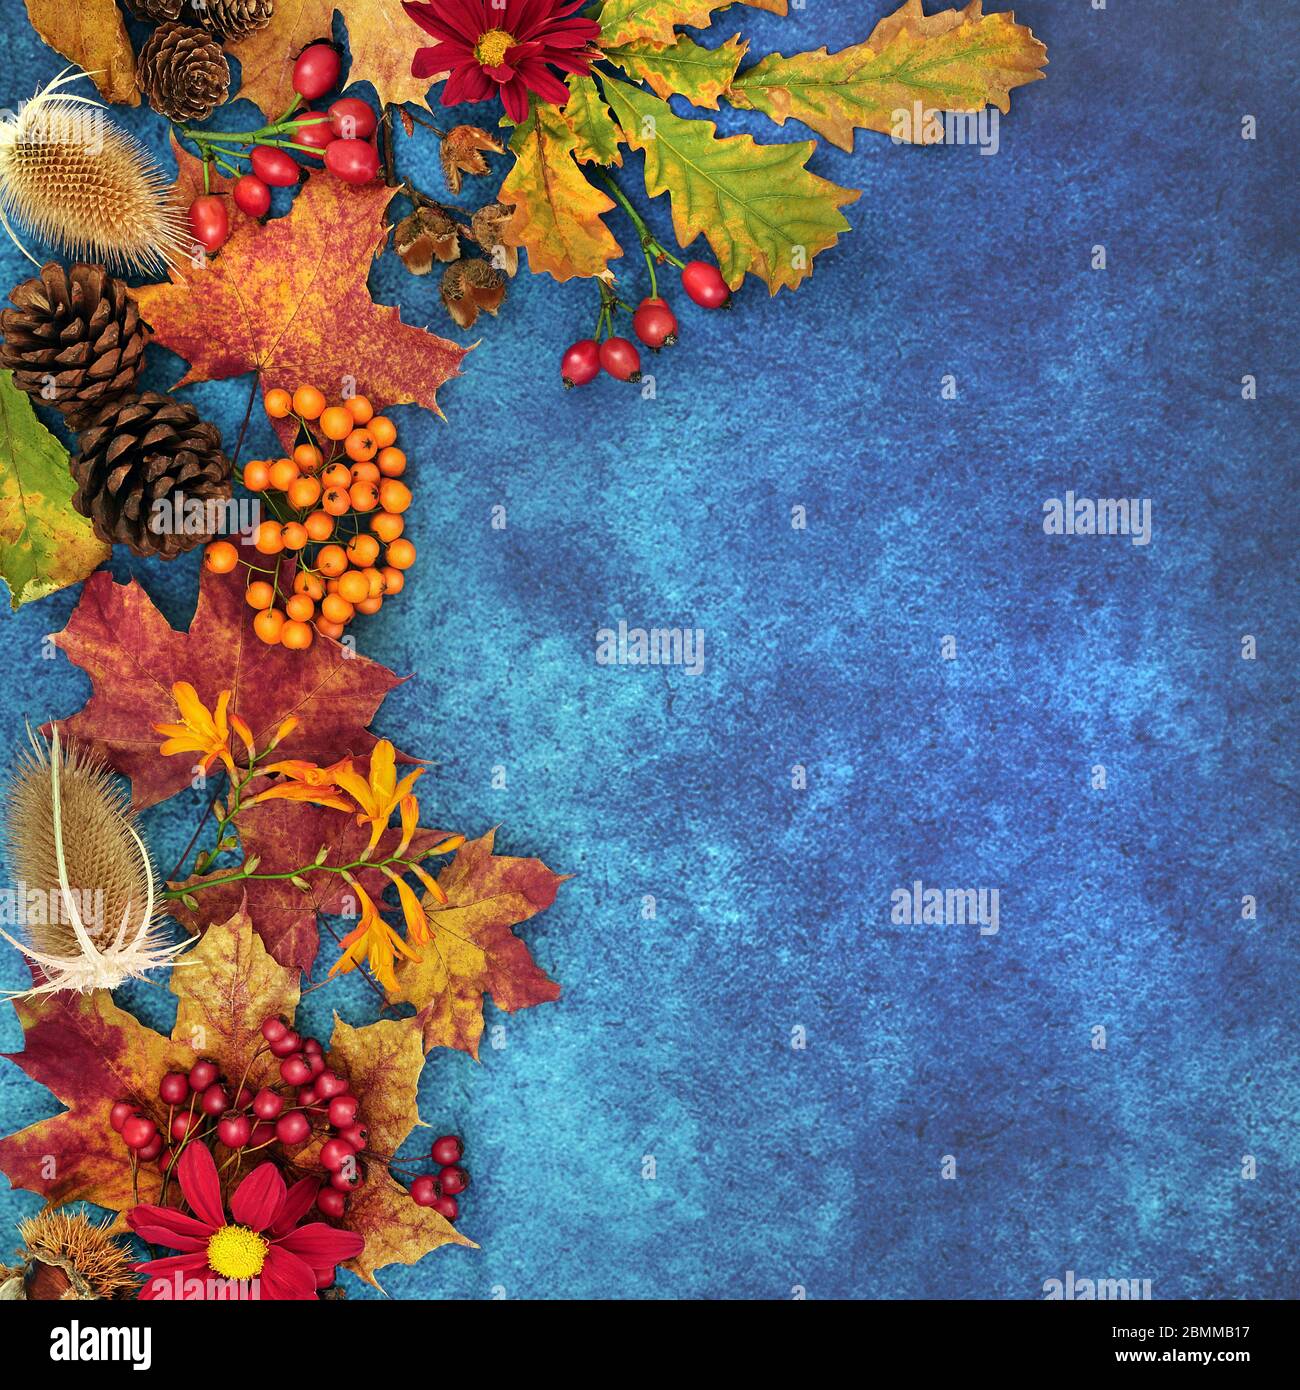 Autumn background border with food, flora and fauna on mottled blue background. Harvest festival theme top view. Stock Photo